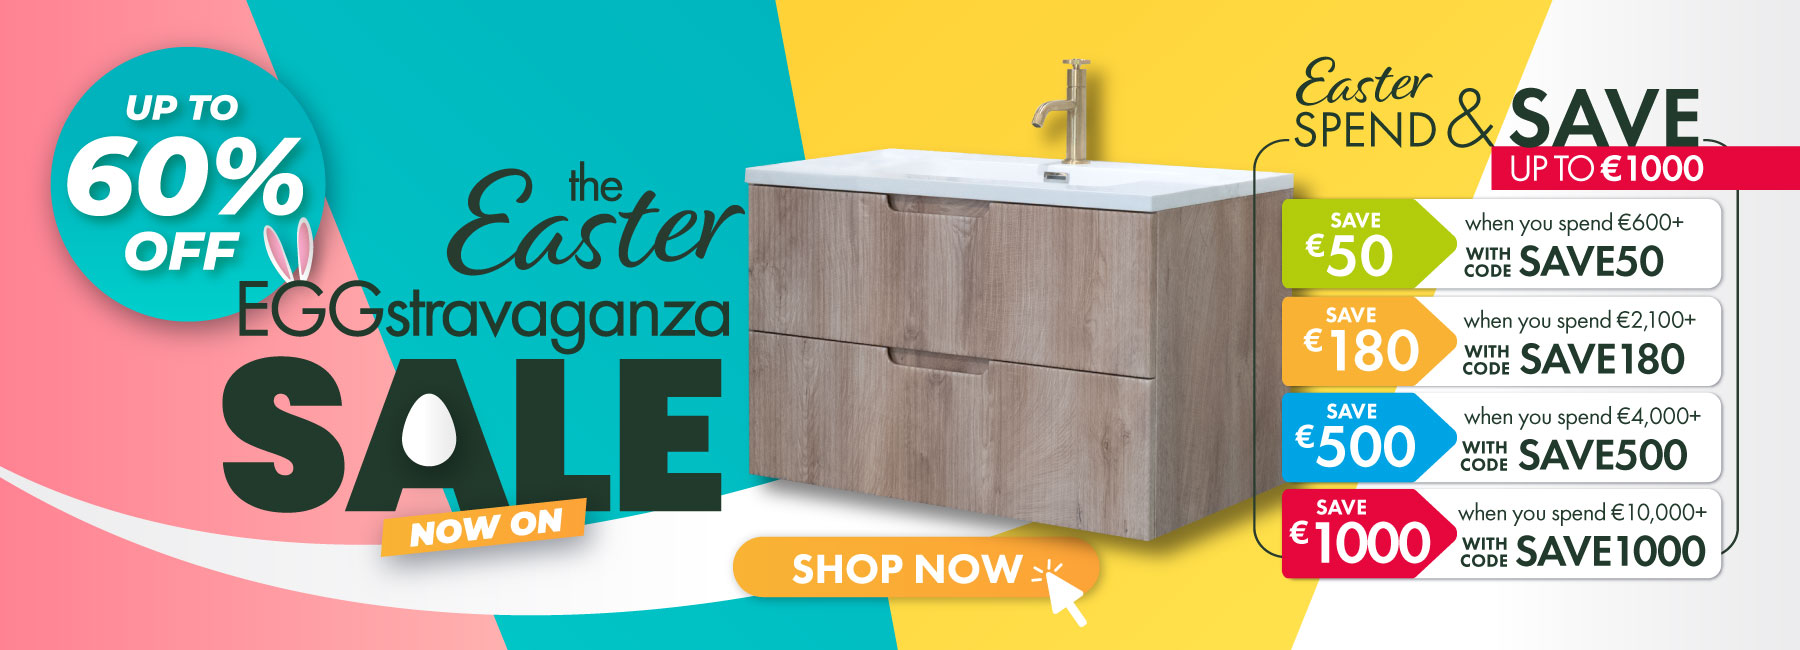 easter Bathroom and Tile Sale is Now On! Spend & Save up to €1000 Banner